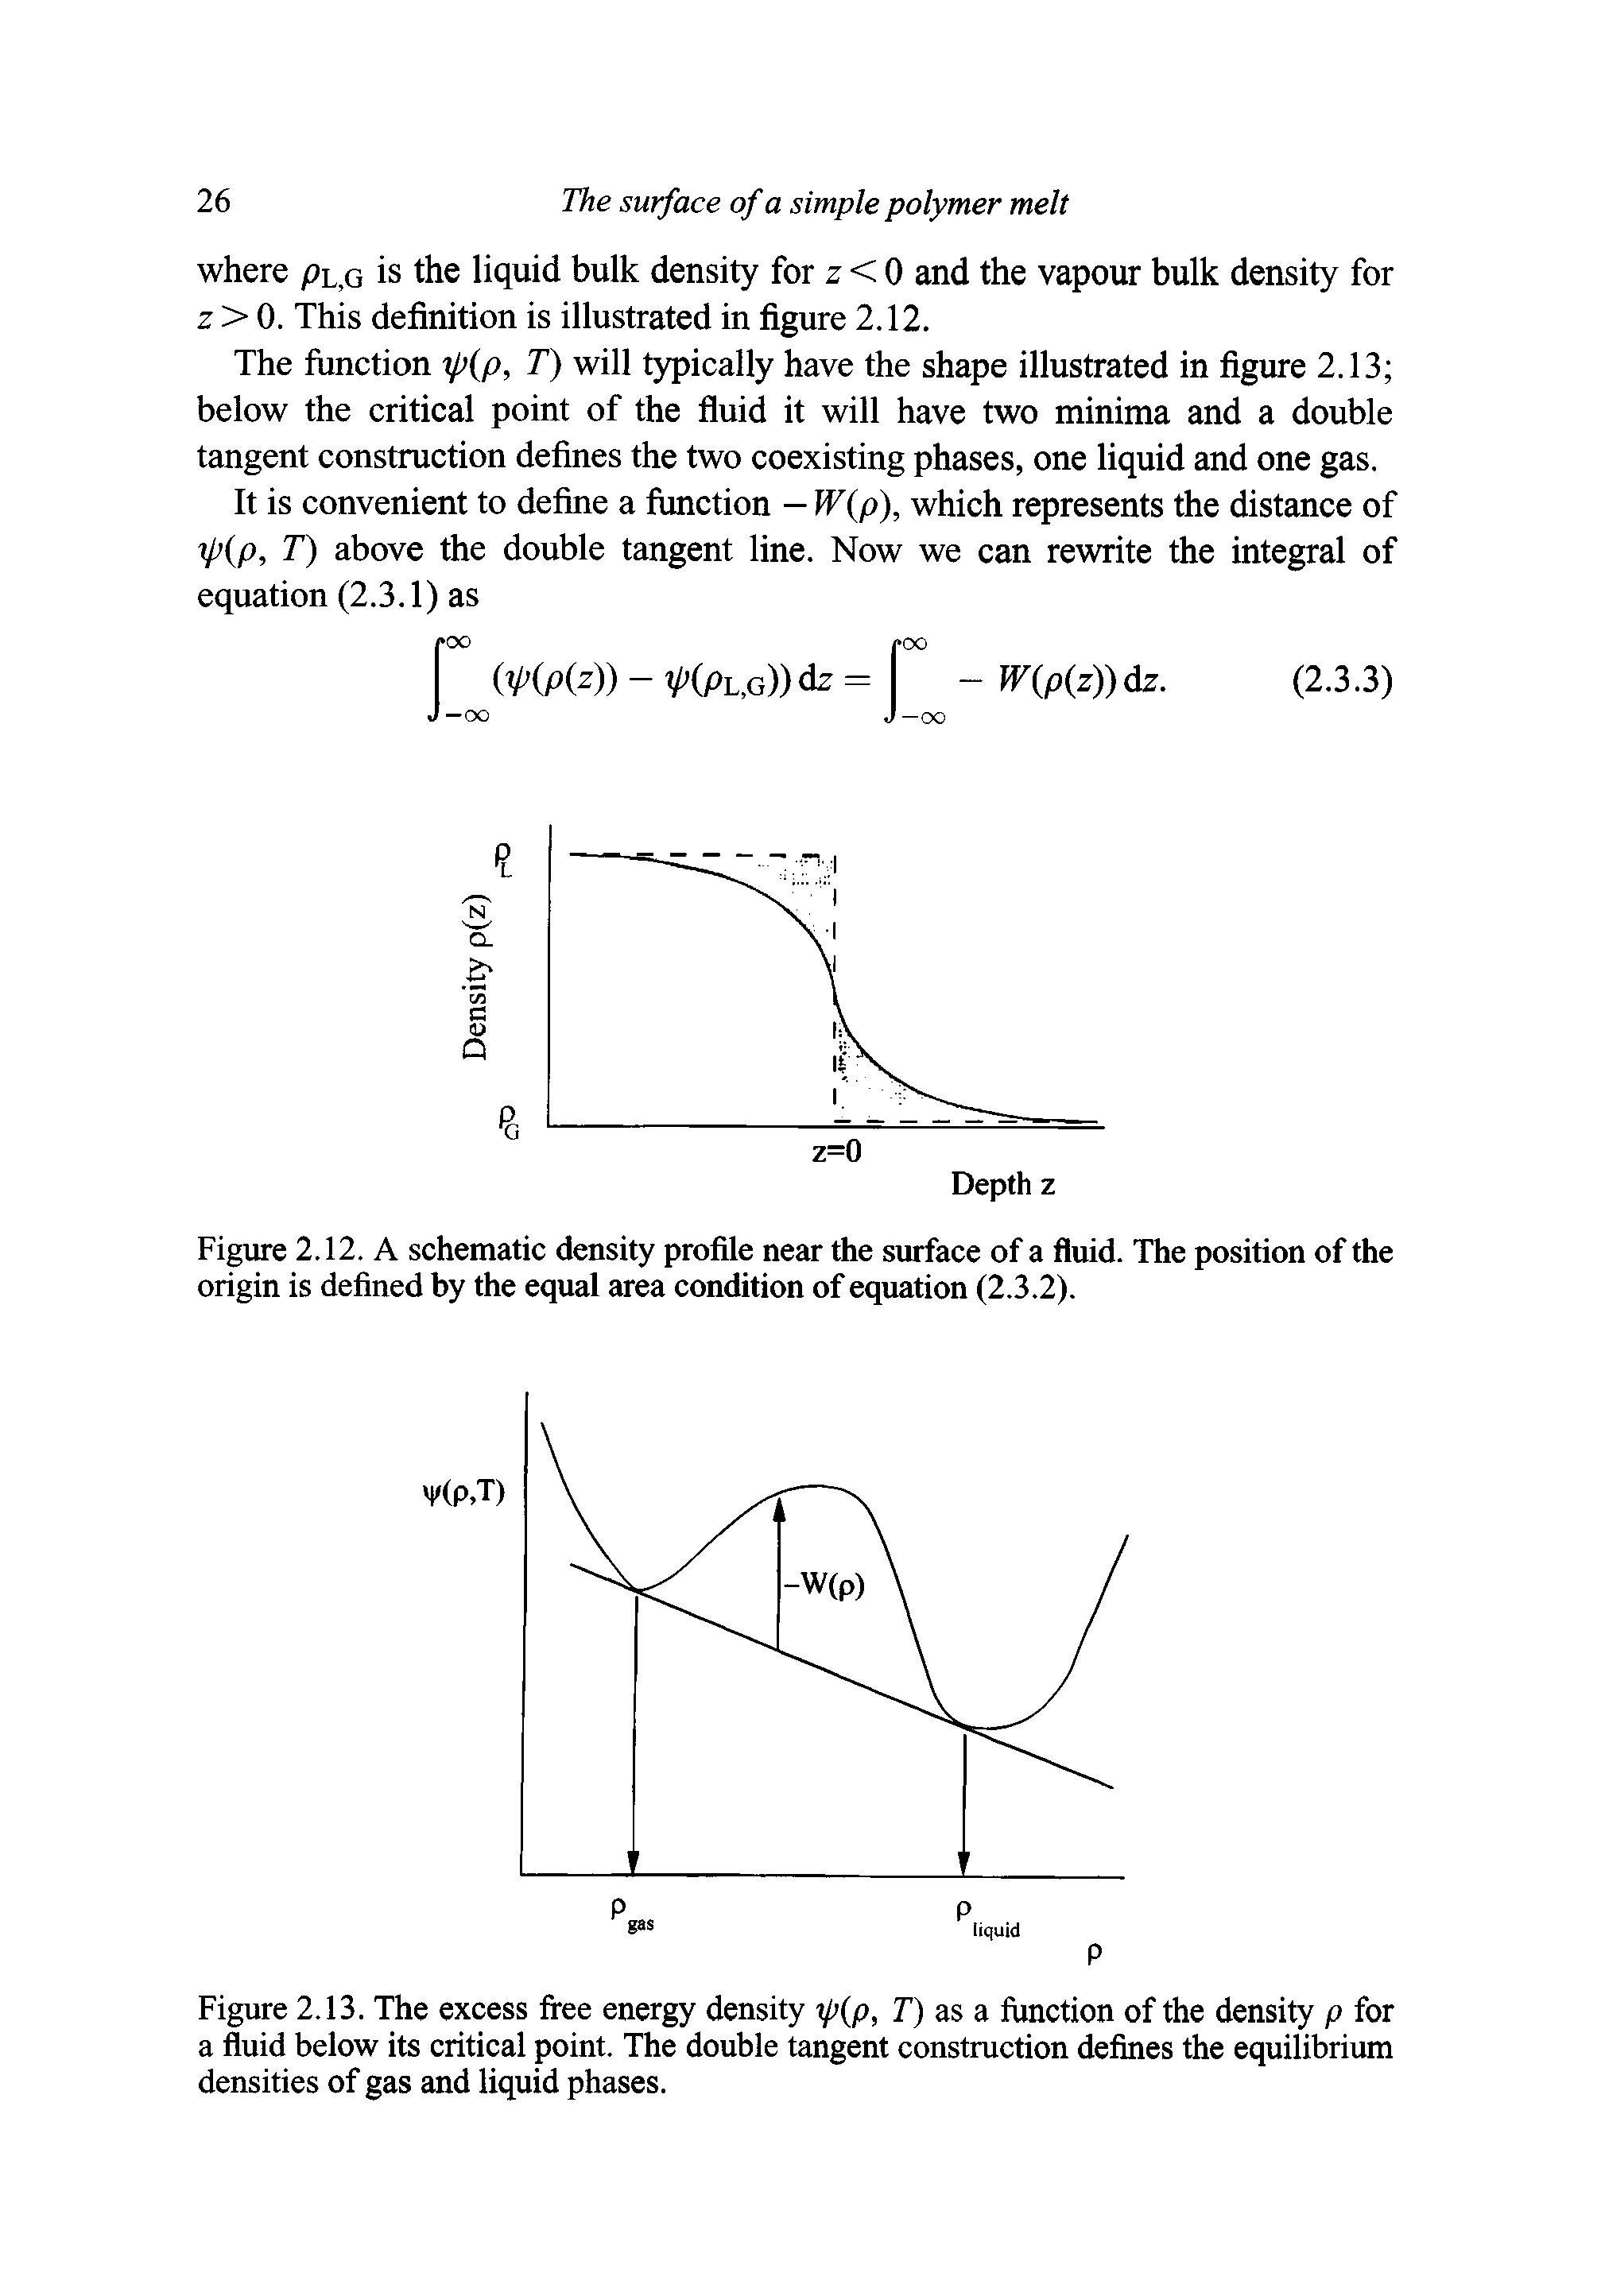 Figure 2.13. The excess free energy density rp p, T) as a fimction of the density p for a fluid below its critical point. The double tangent construction defines the equilibrium densities of gas and liquid phases.